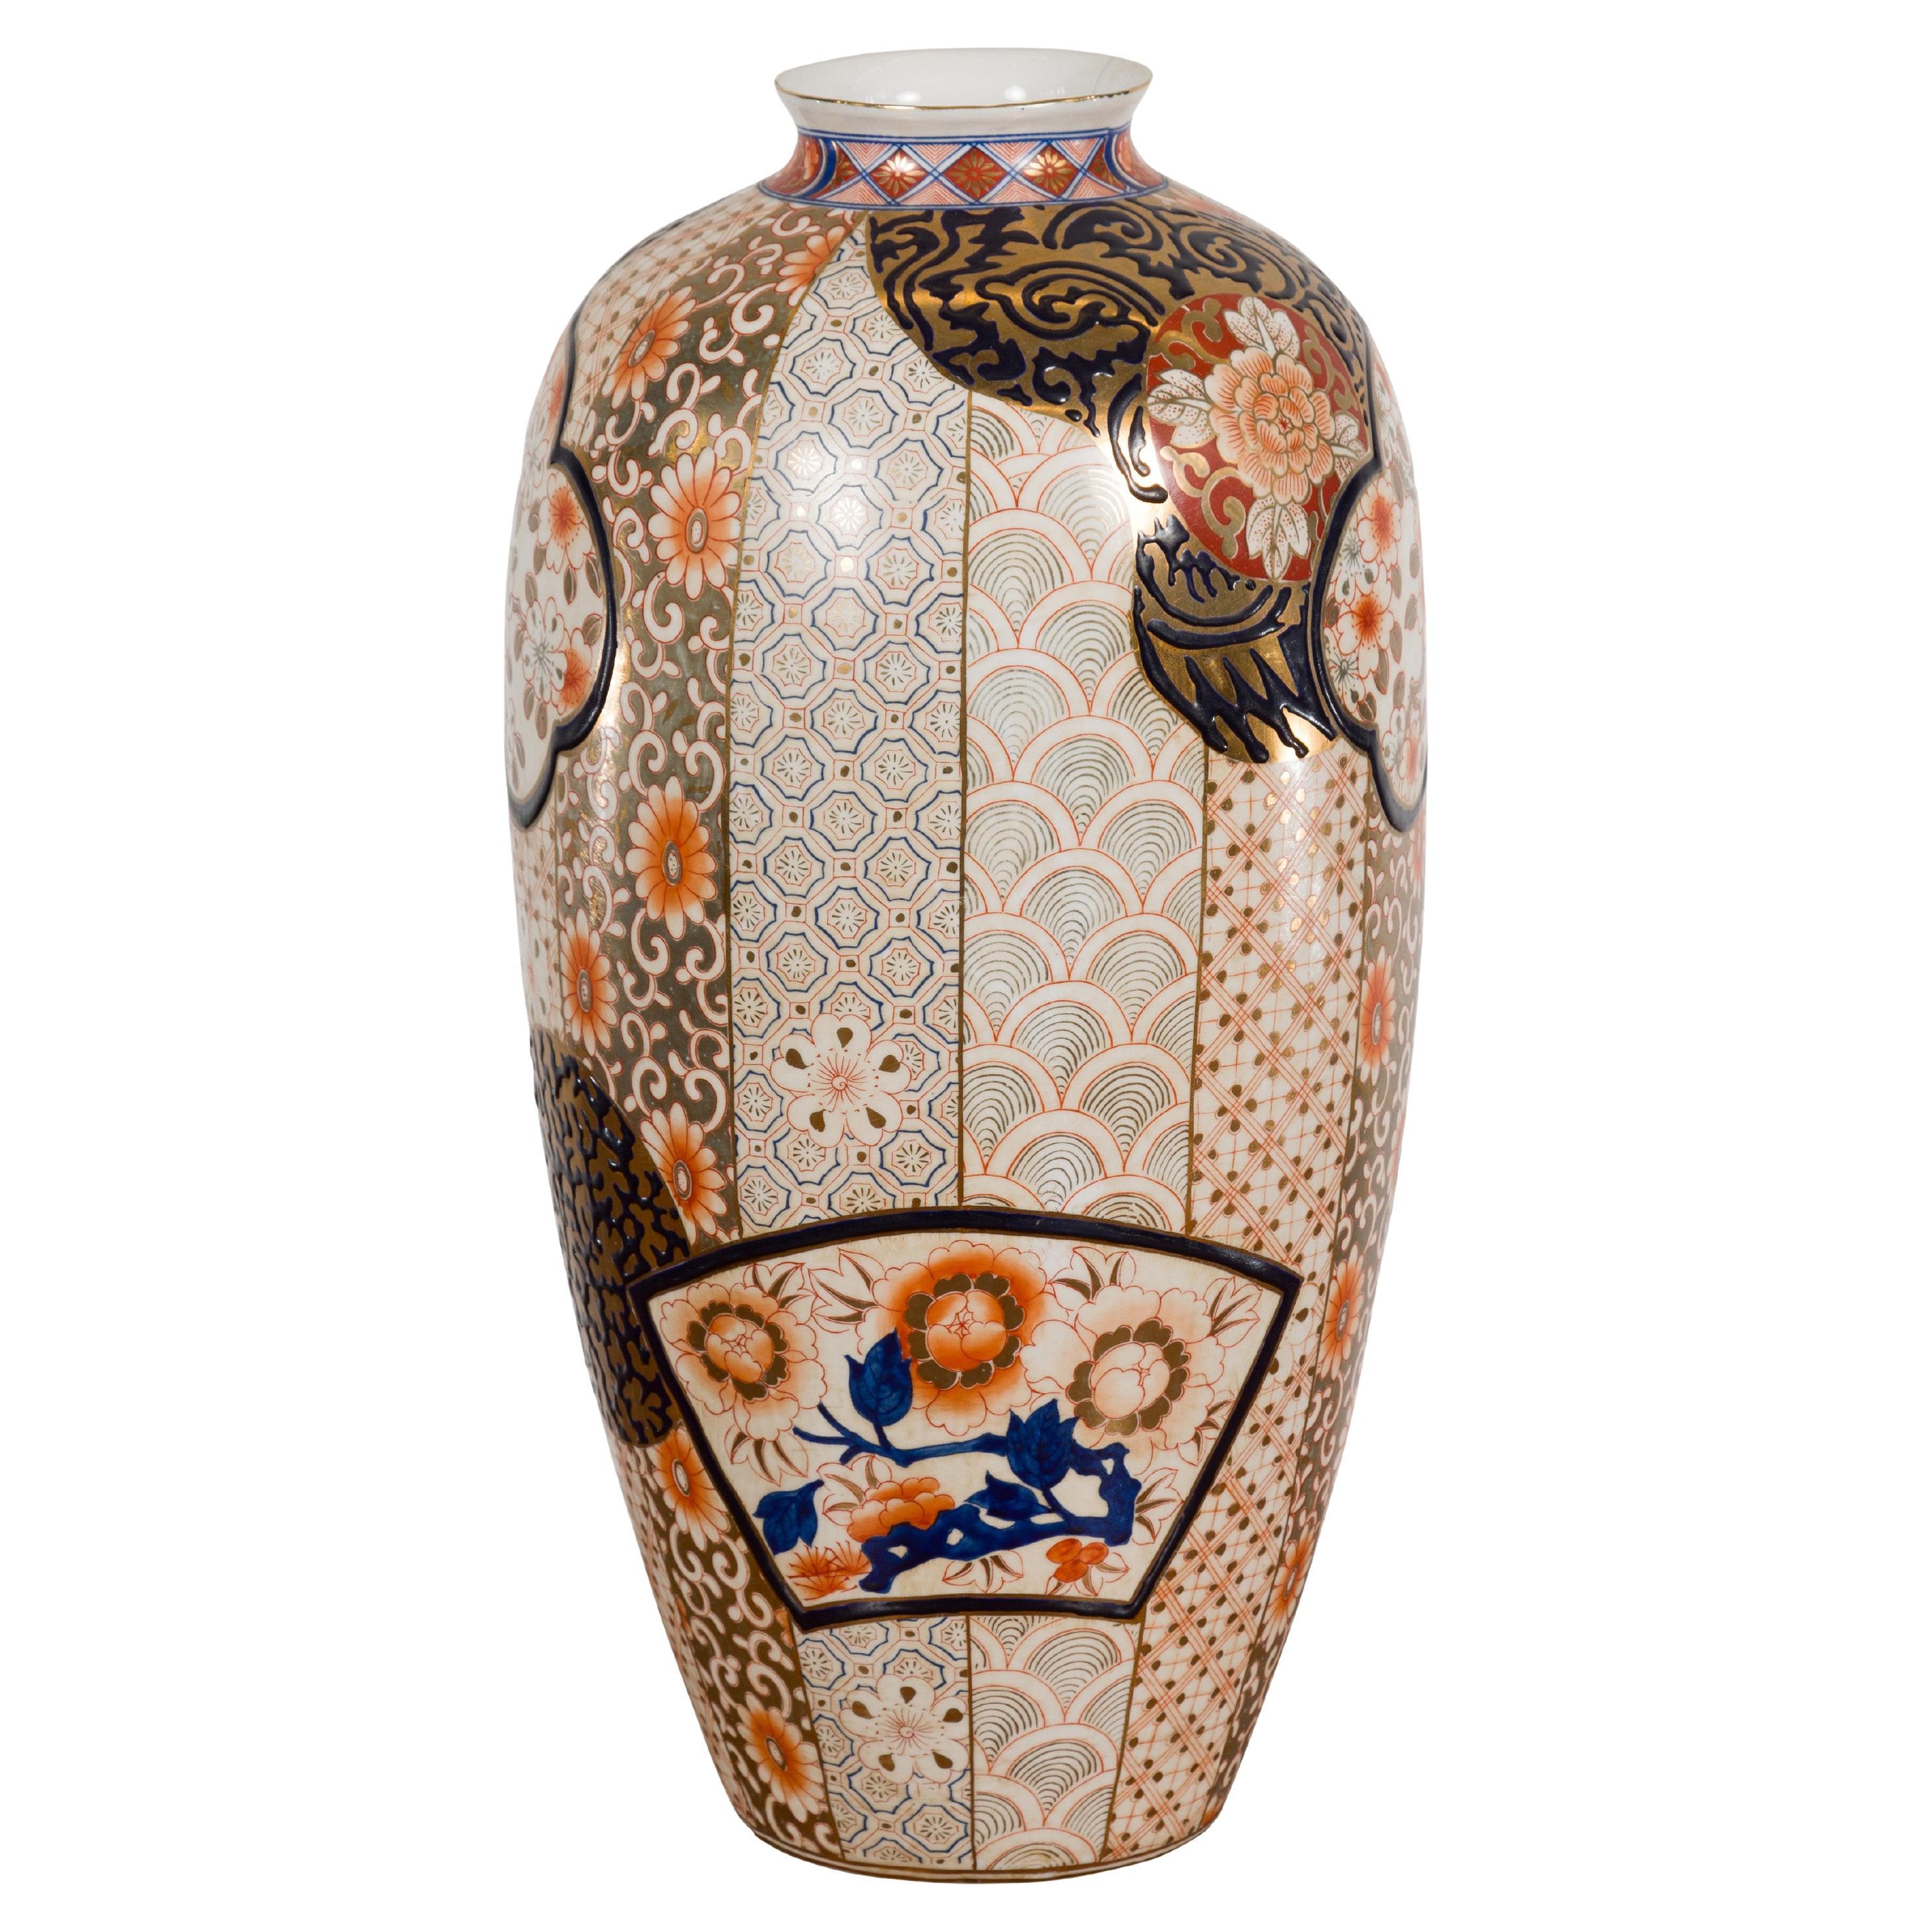 Arita Japanese Style Vase with Gold, Blue and Orange Floral Motifs